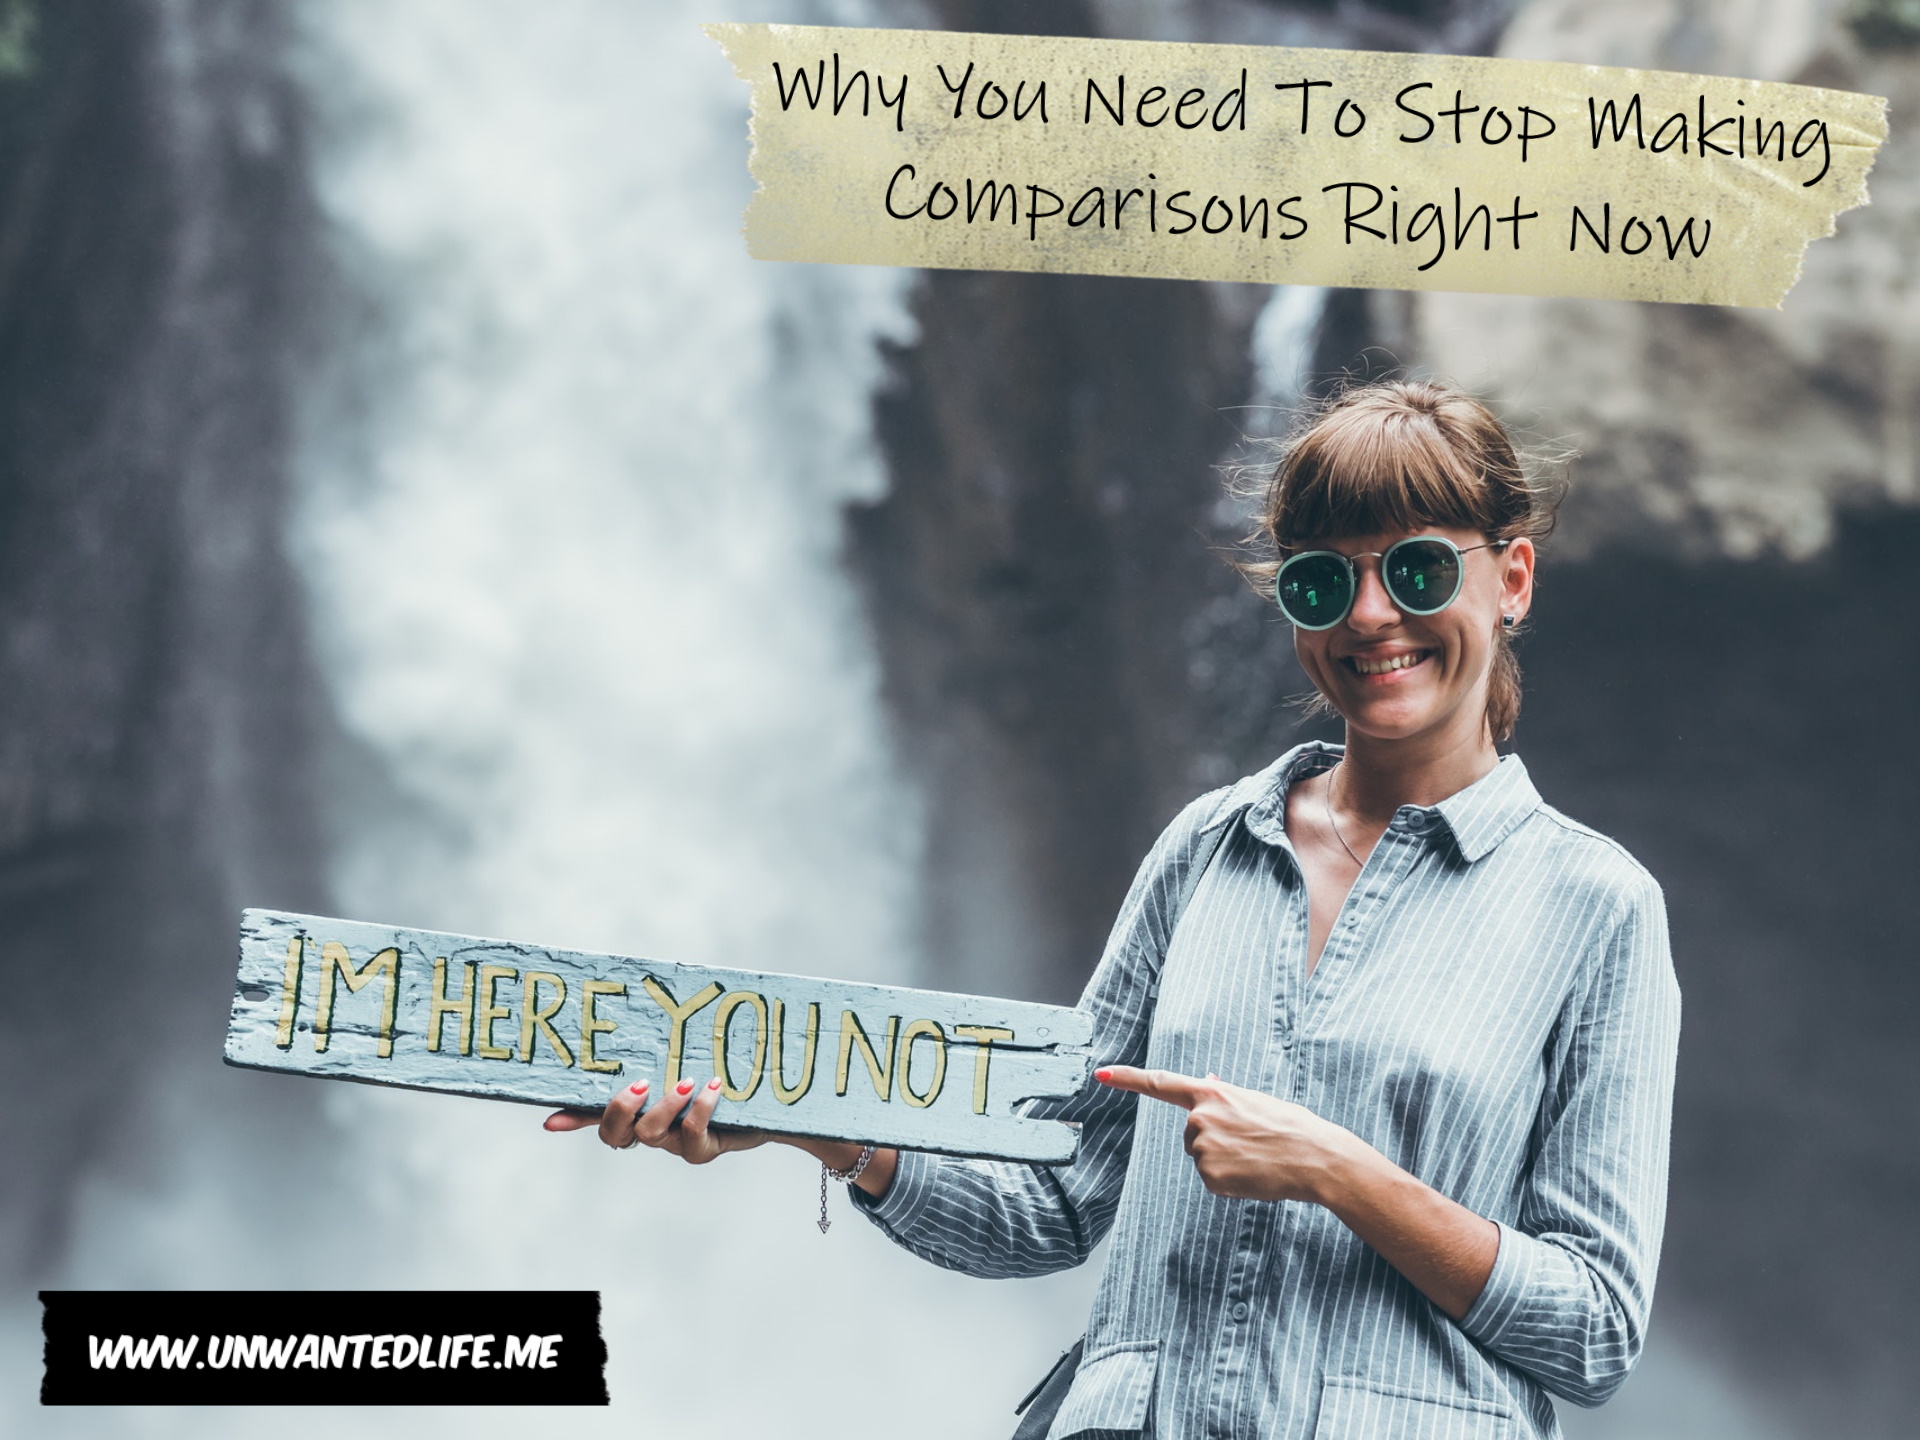 A photo of a White woman standing in front of a waterfall holding a sign that says "I'm here you not" to represent the topic of the article - Why You Need To Stop Making Comparisons Right Now